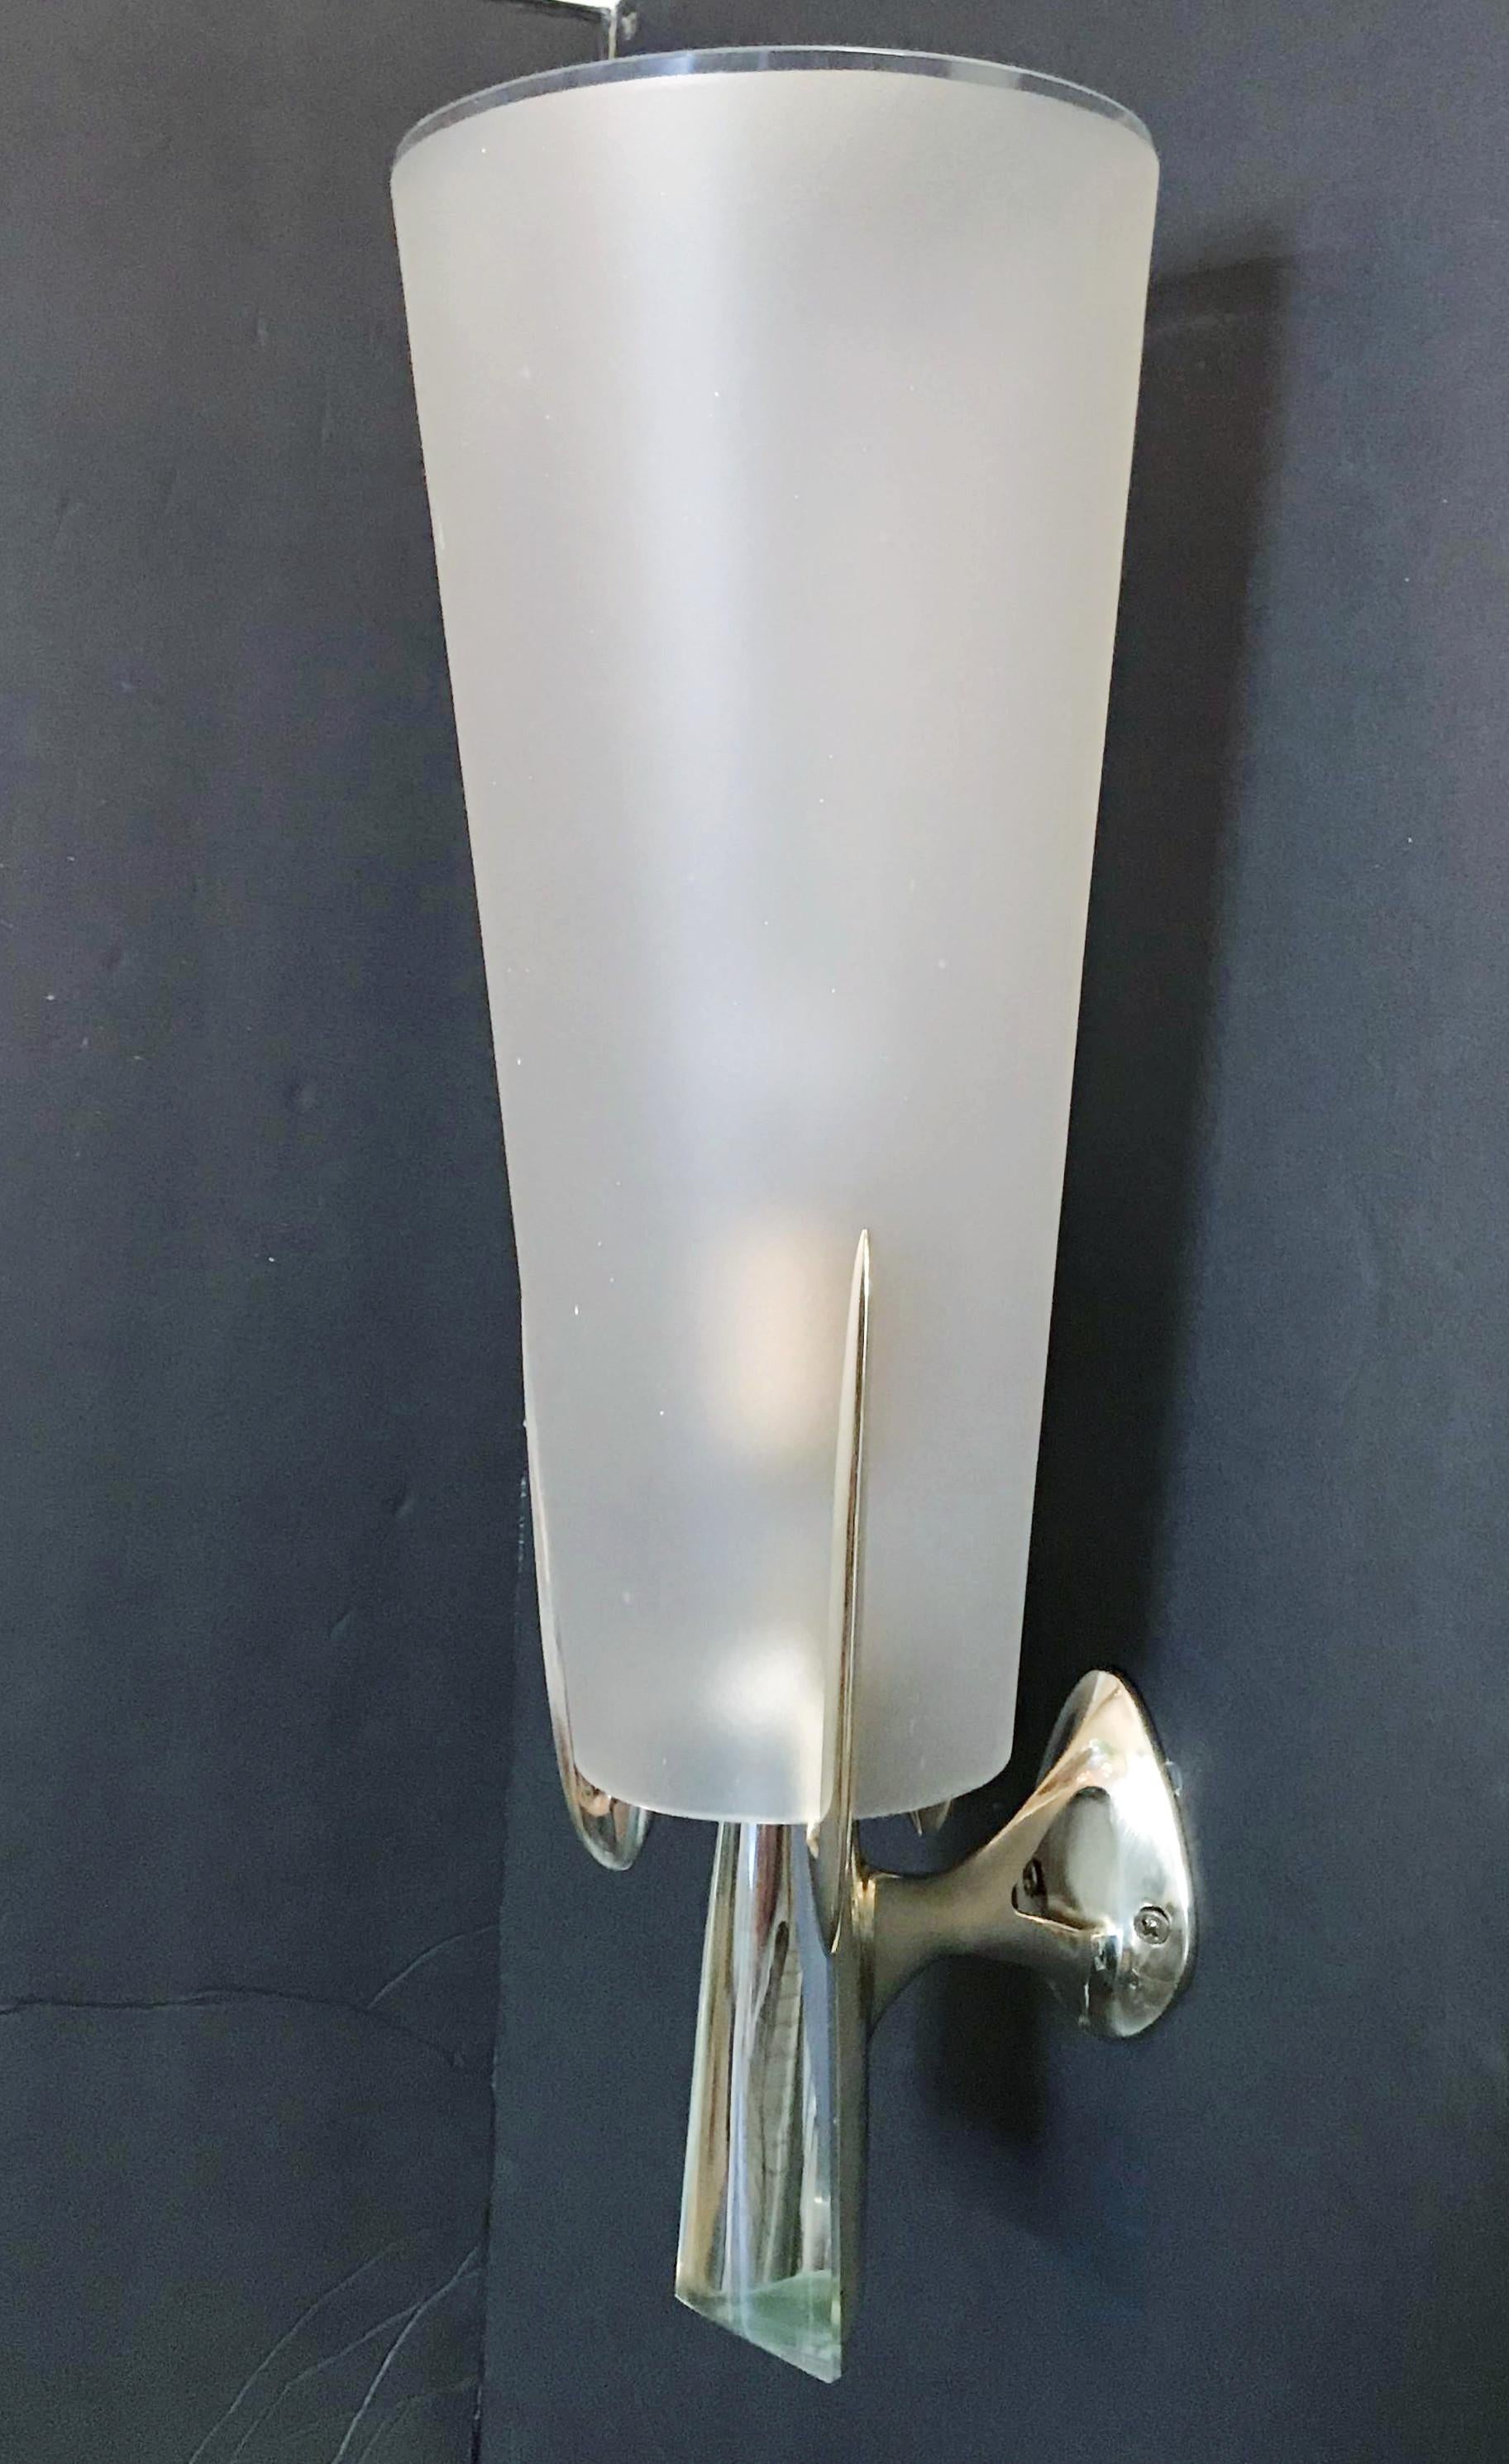 Rare Italian wall lights by Max Ingrand for Fontana Arte, satin beveled glass shades held by polished brass structures with beveled glass crystals / made in Italy in 1959
Measures: Height 18 inches, width 6 inches, depth 6 inches
1-light / standard